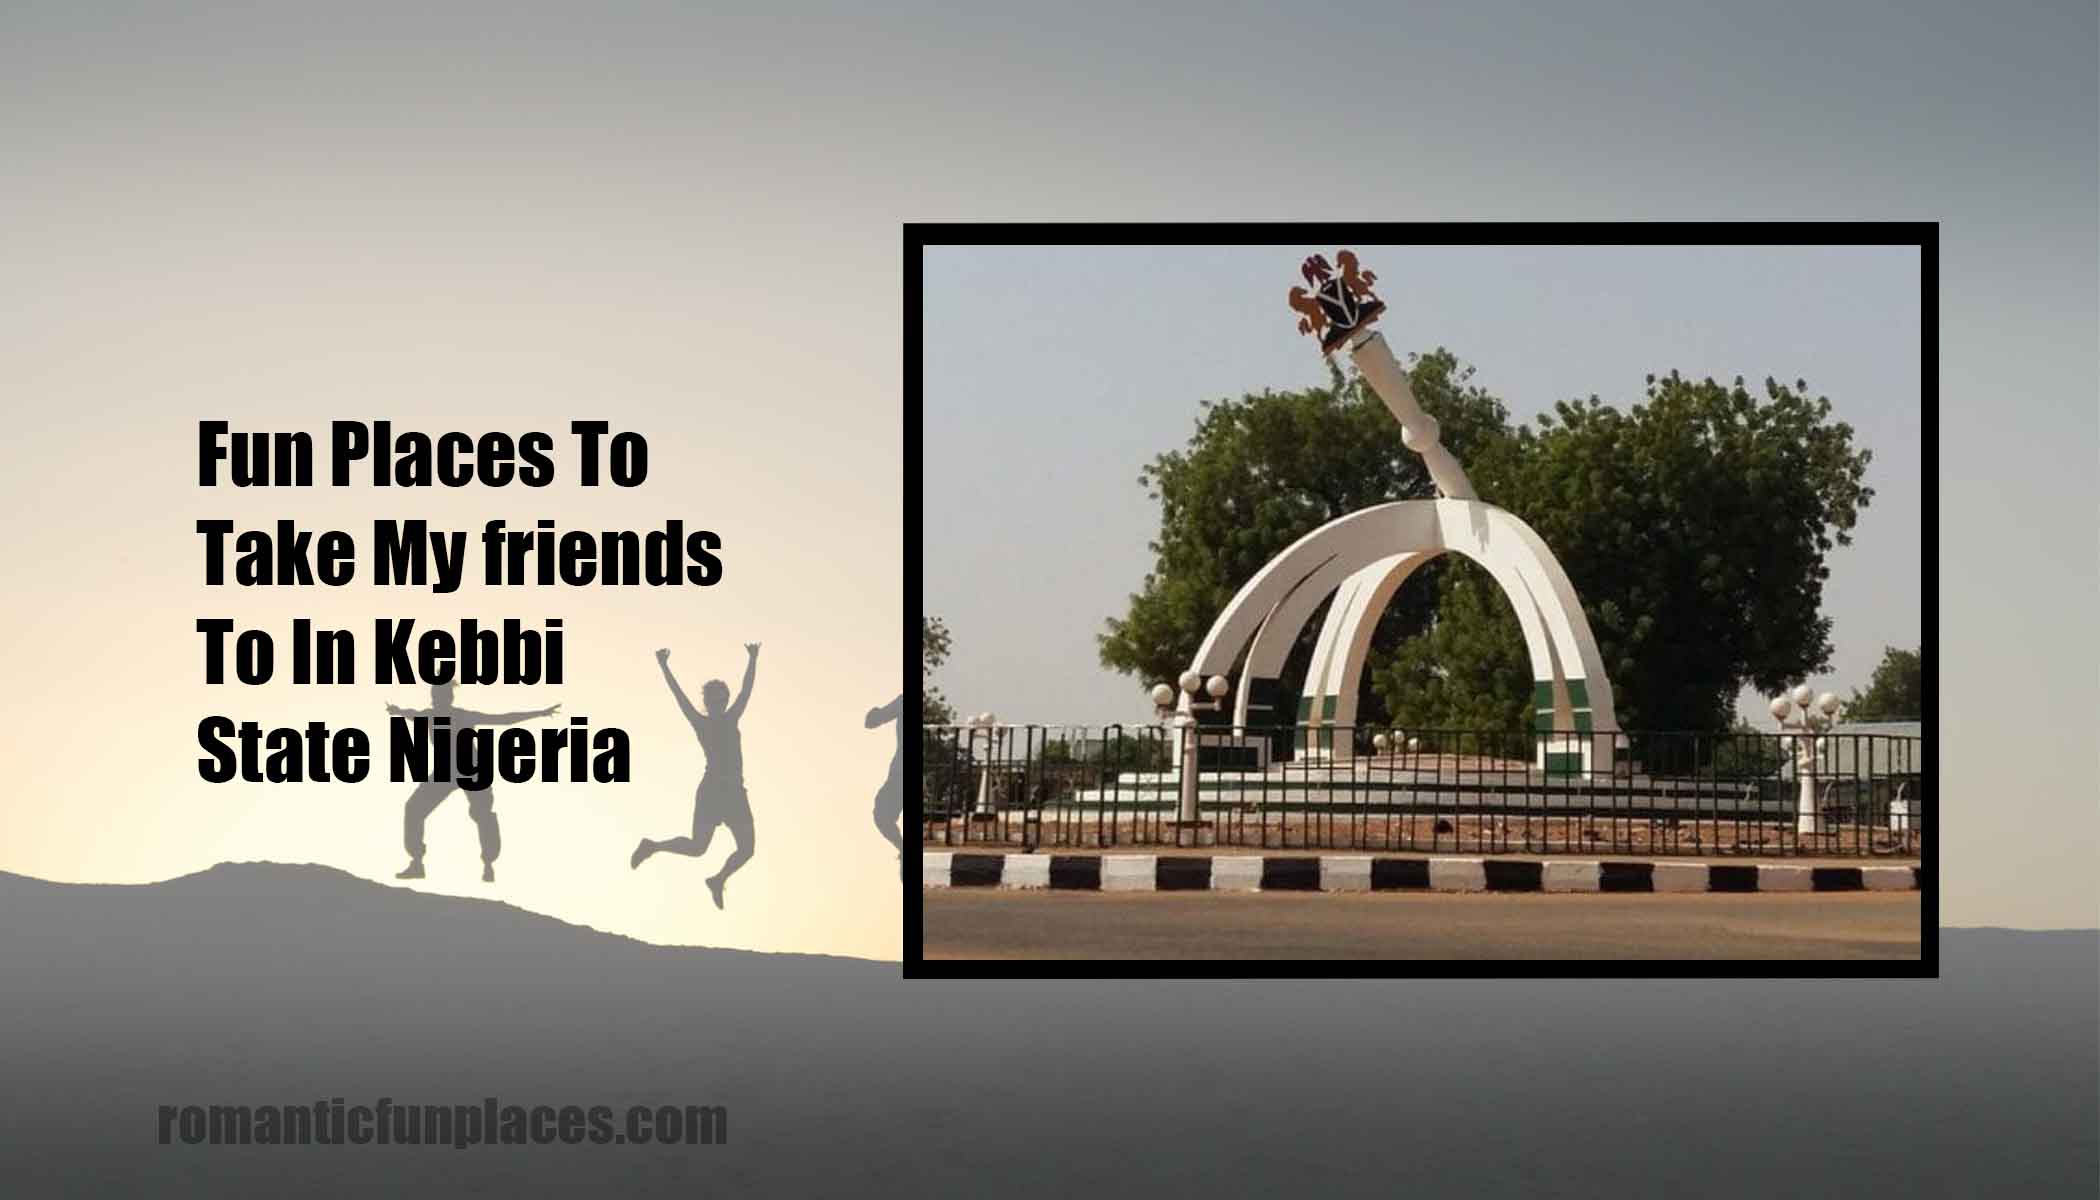 Fun Places To Take My friends To In Kebbi State Nigeria